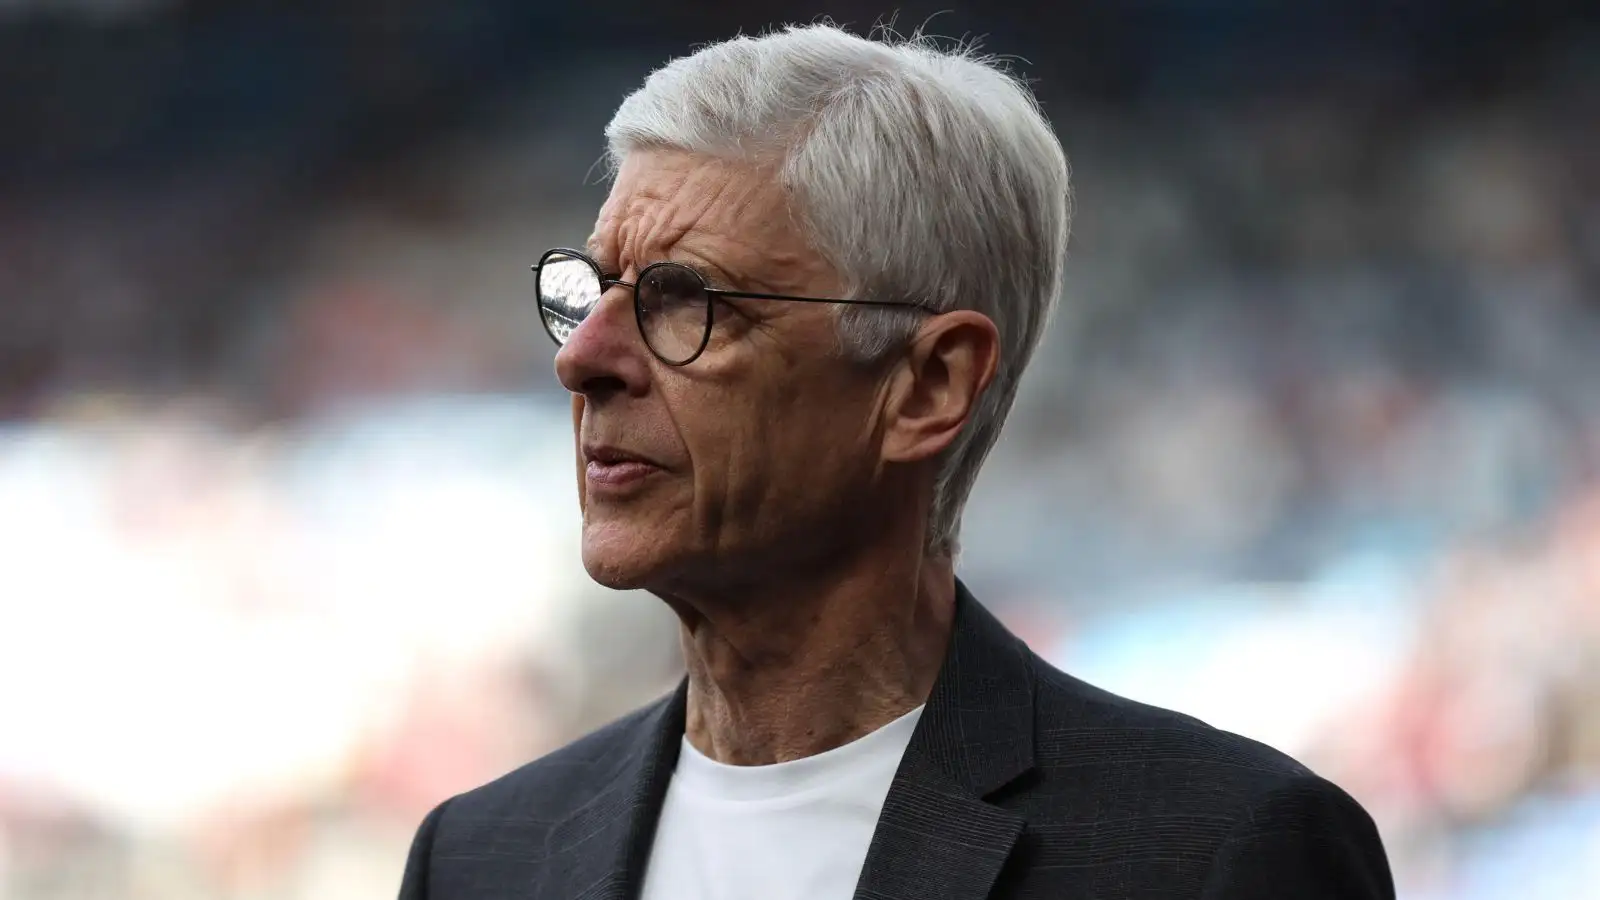 Wenger on World Cup